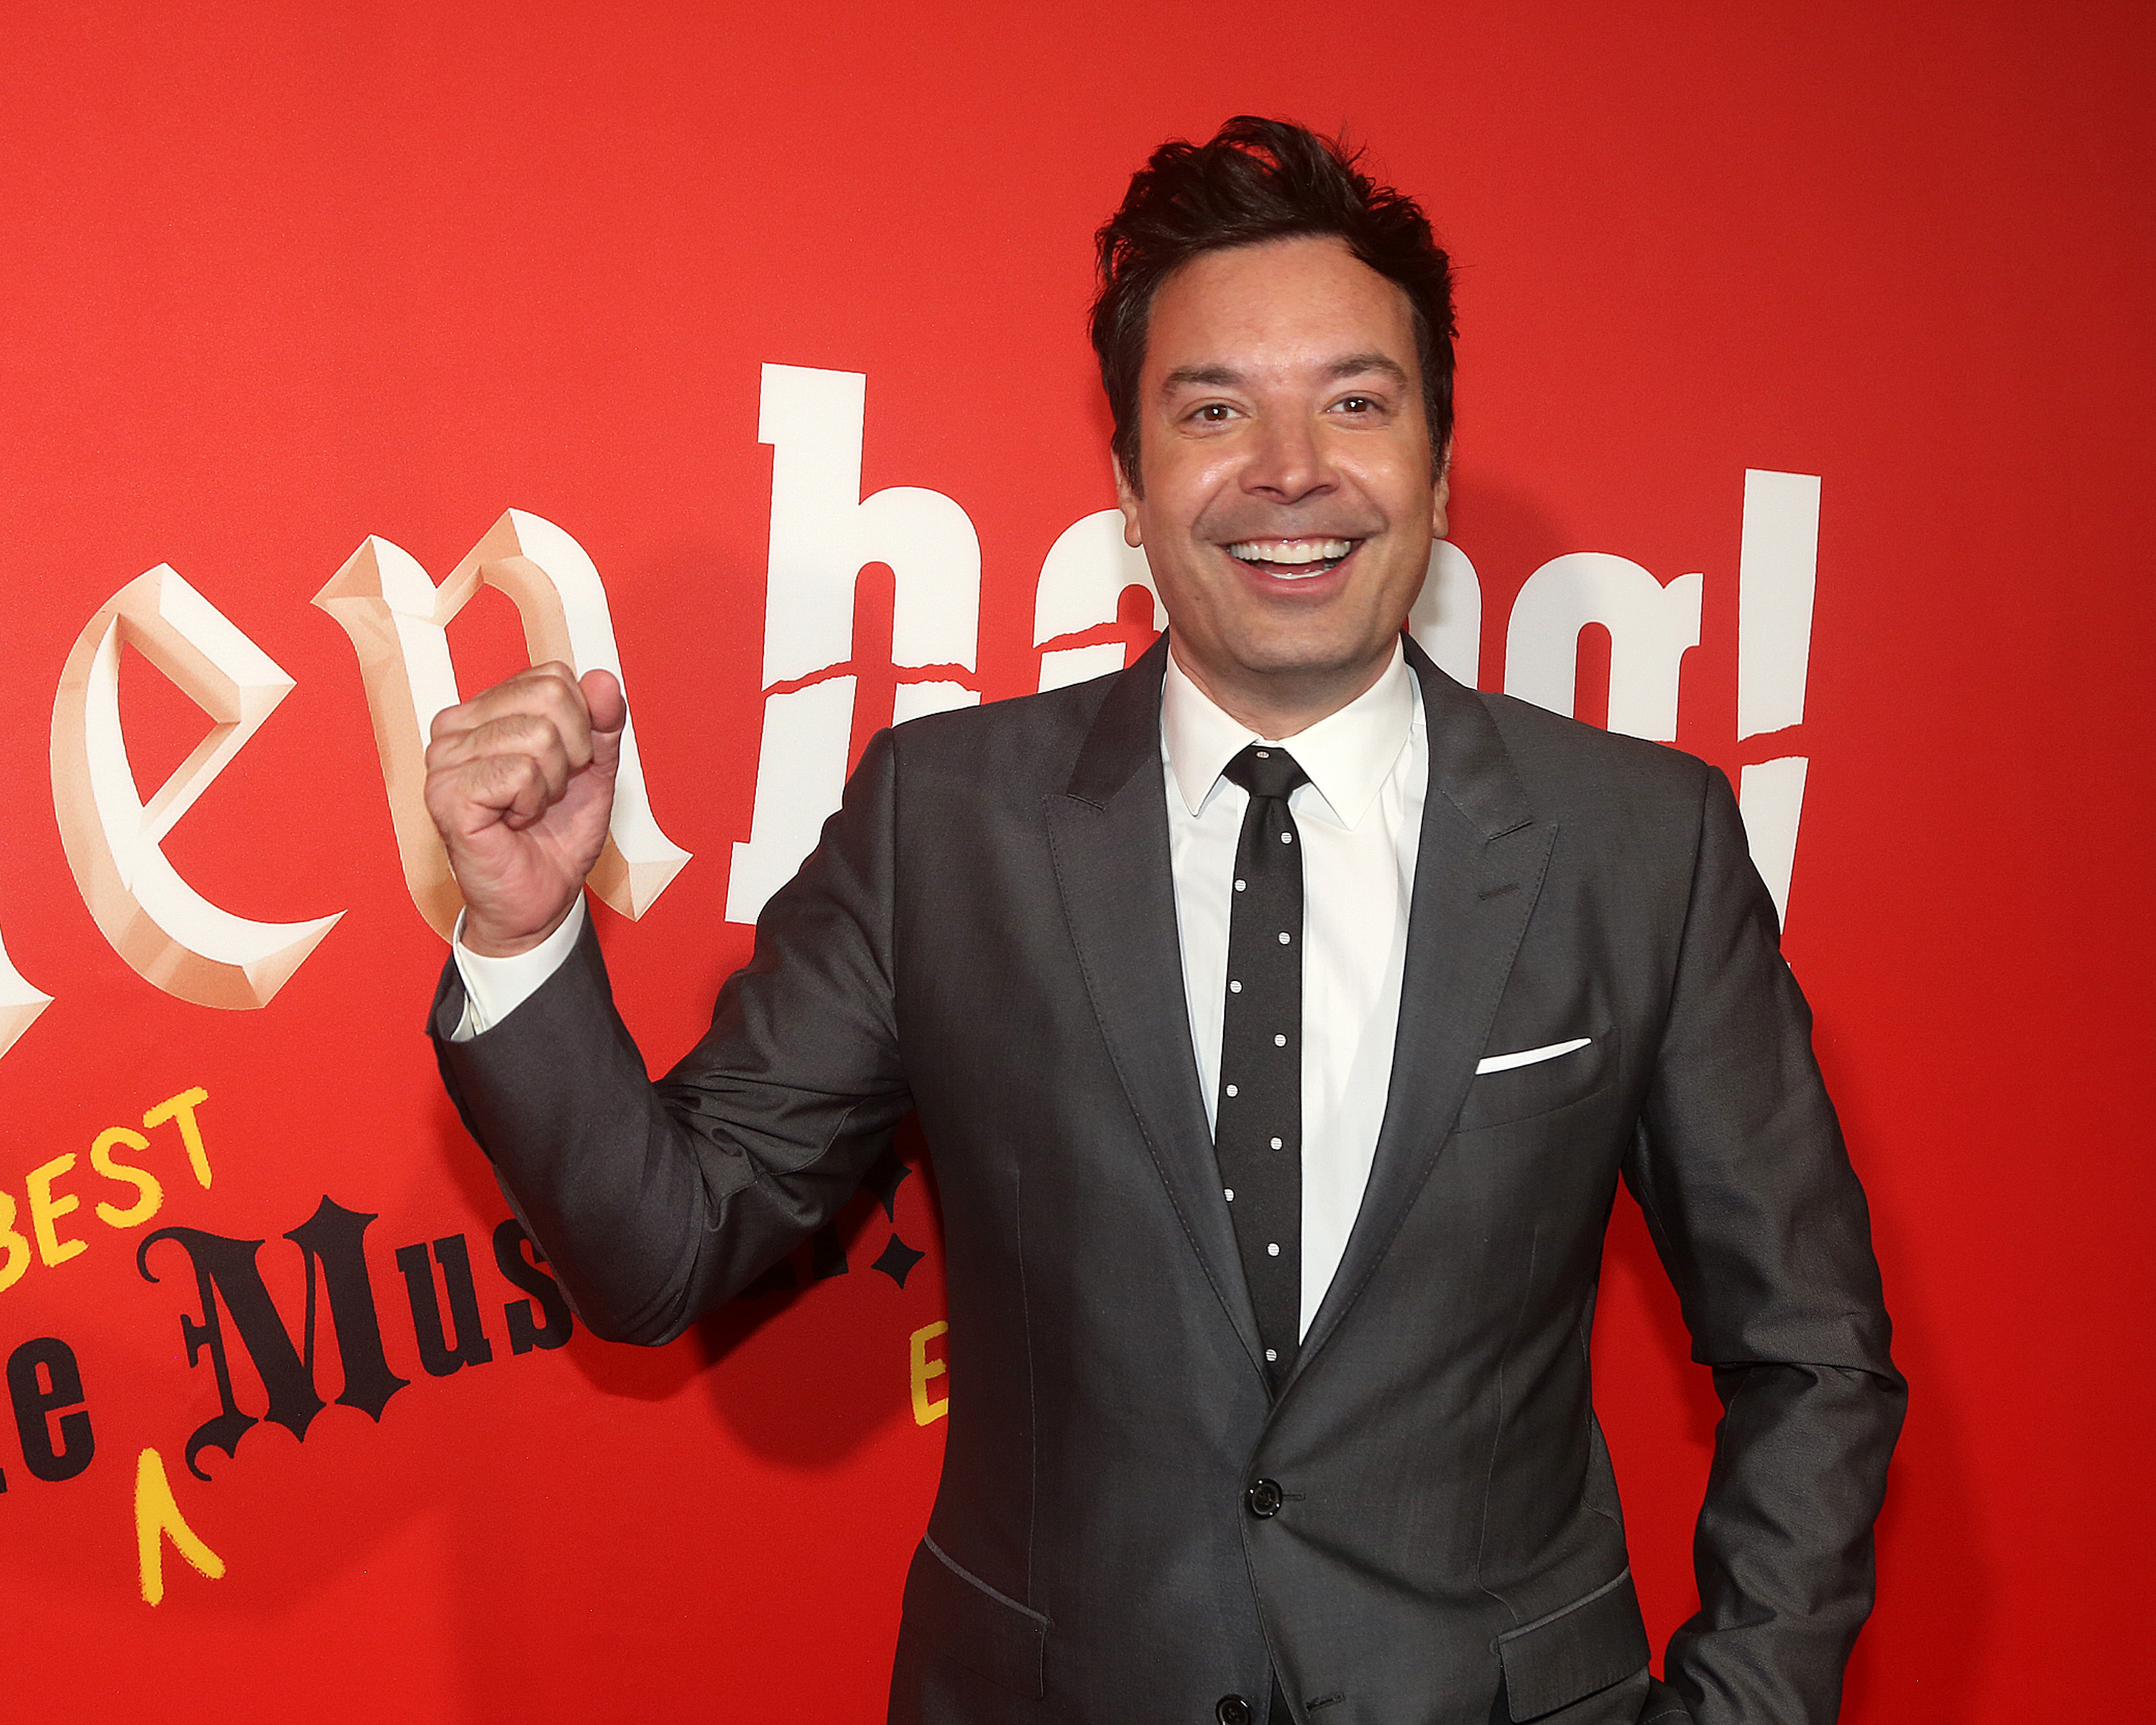 jimmy in a suit with a polka dot tie posing with a raised fist in front of a promotional backdrop